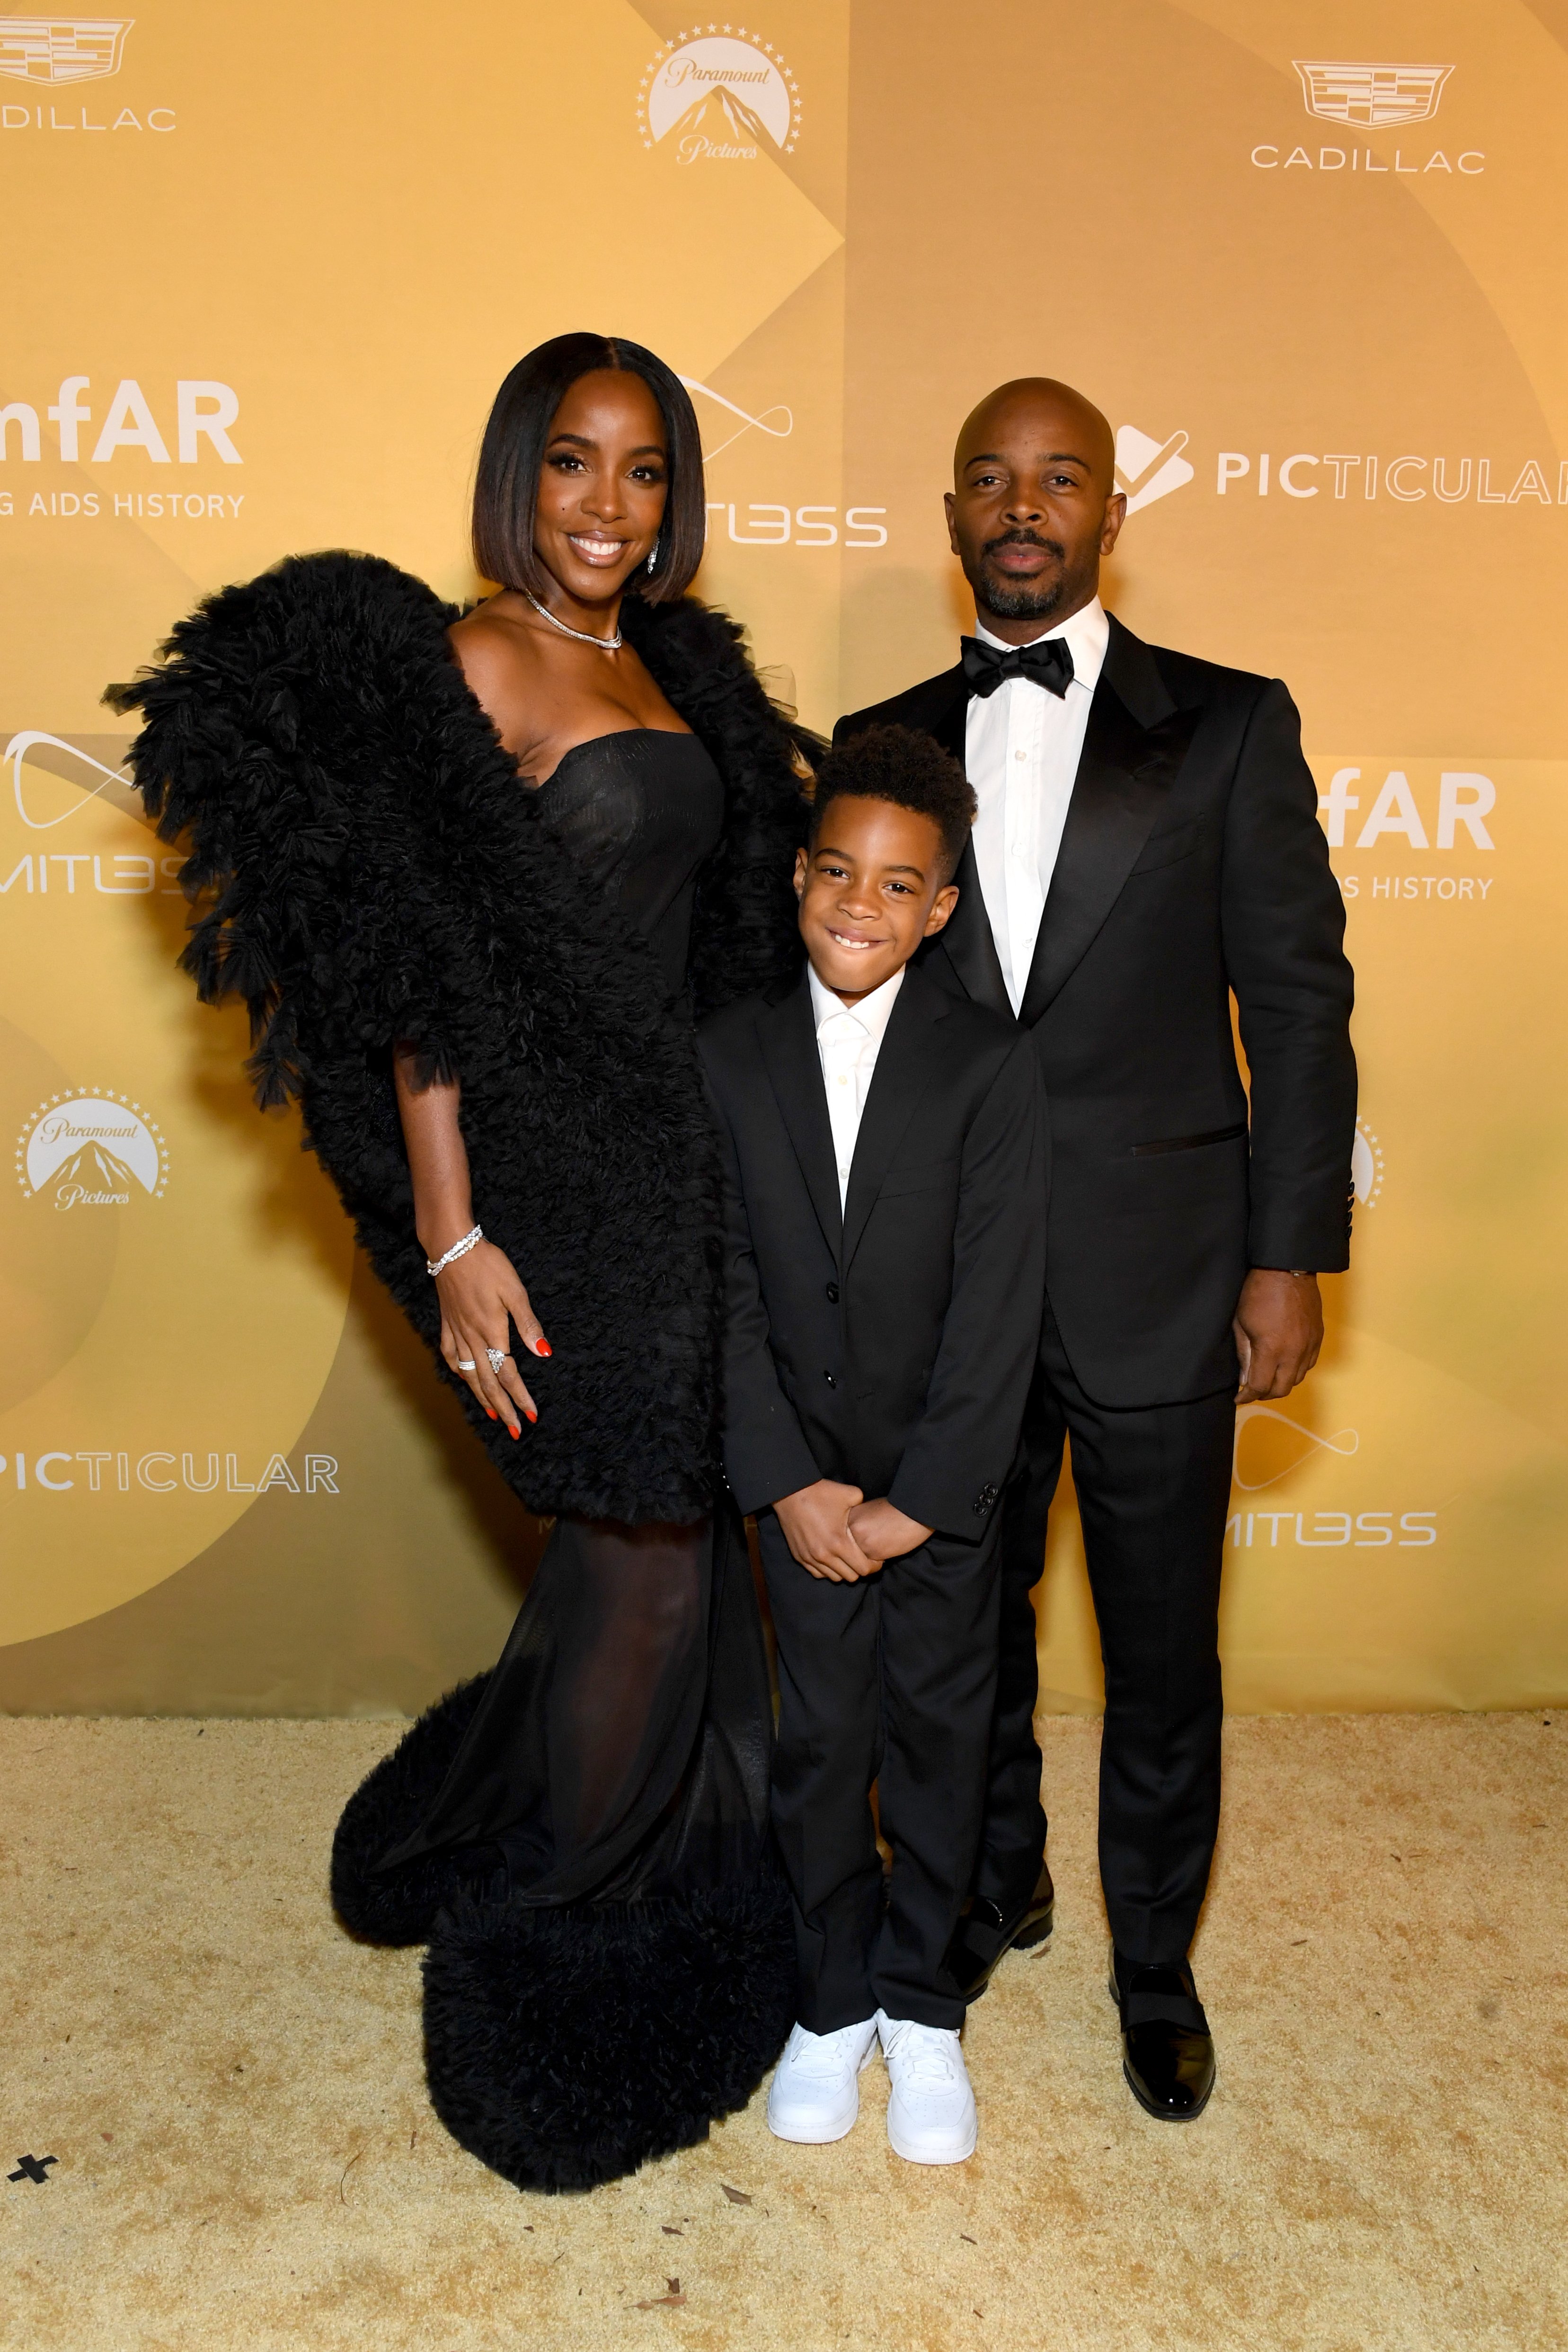 Kelly Rowland, Titan Weatherspoon, and Tim Weatherspoon attend amfAR Gala Los Angeles 2022 at Pacific Design Center on November 3, 2022 in West Hollywood, California. | Source: Getty Images